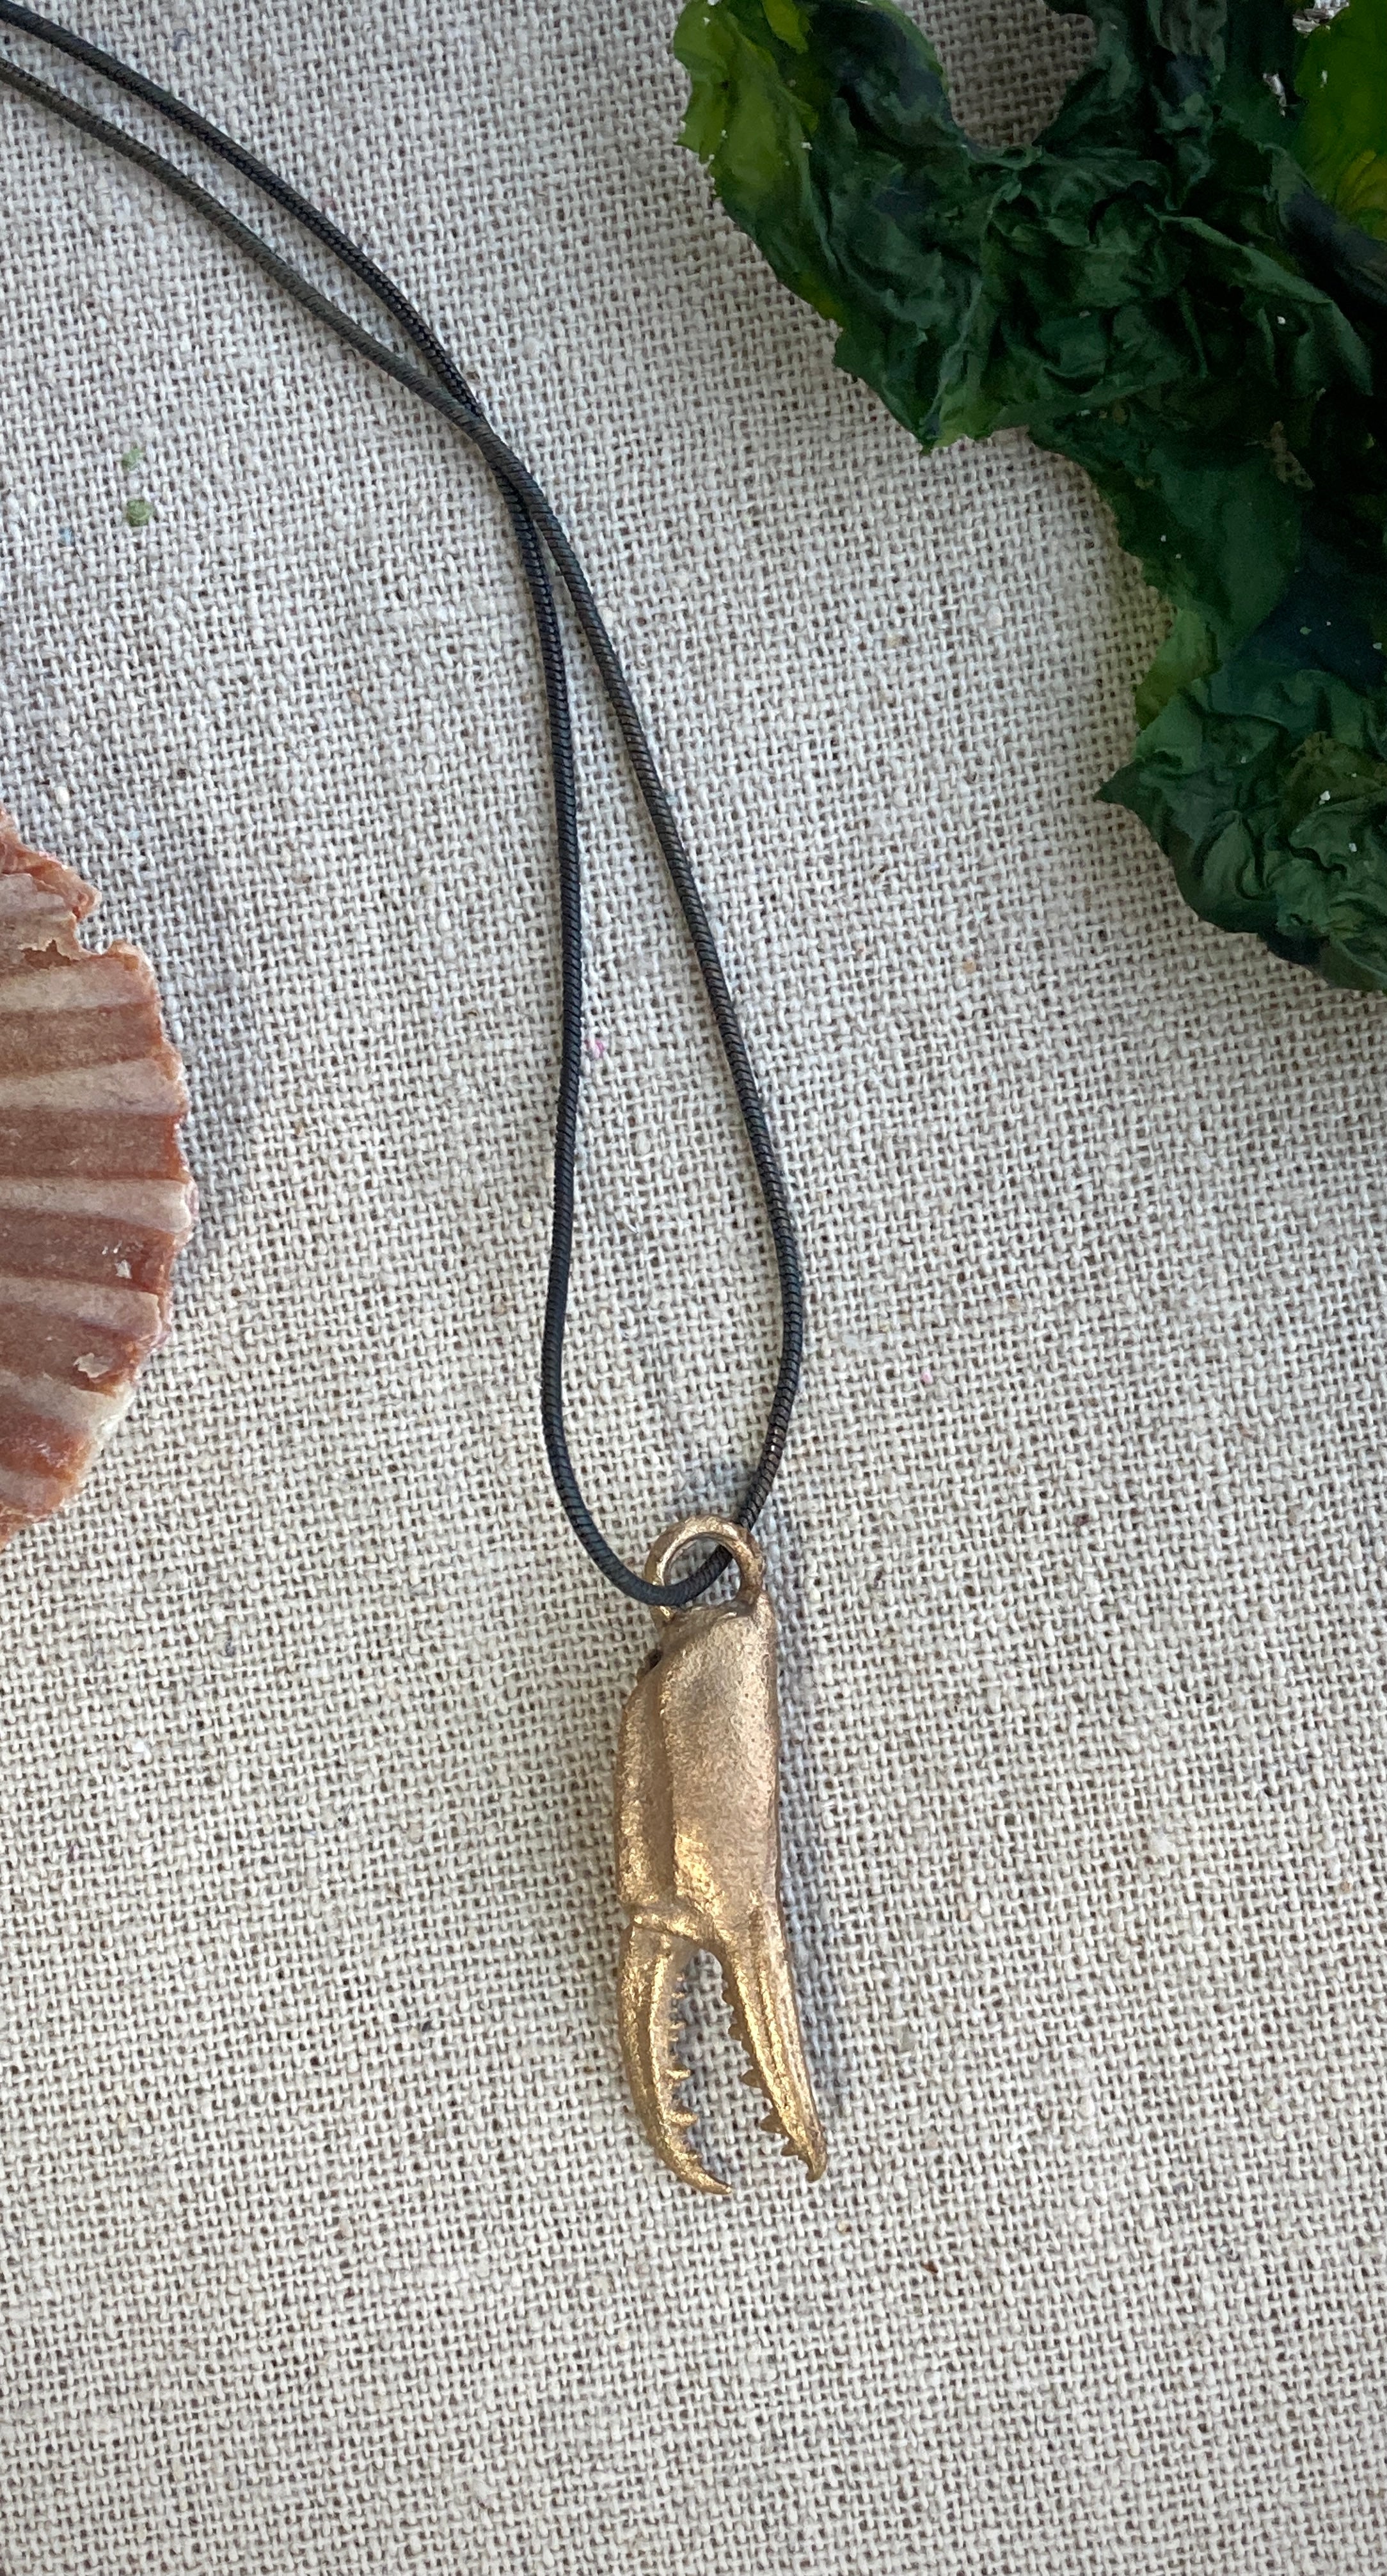 Large Crab Claw Necklace REAL Crab Claw Cast Brass Pendant Necklace Brass Crab  Claw Necklace Pendant Necklace - Etsy